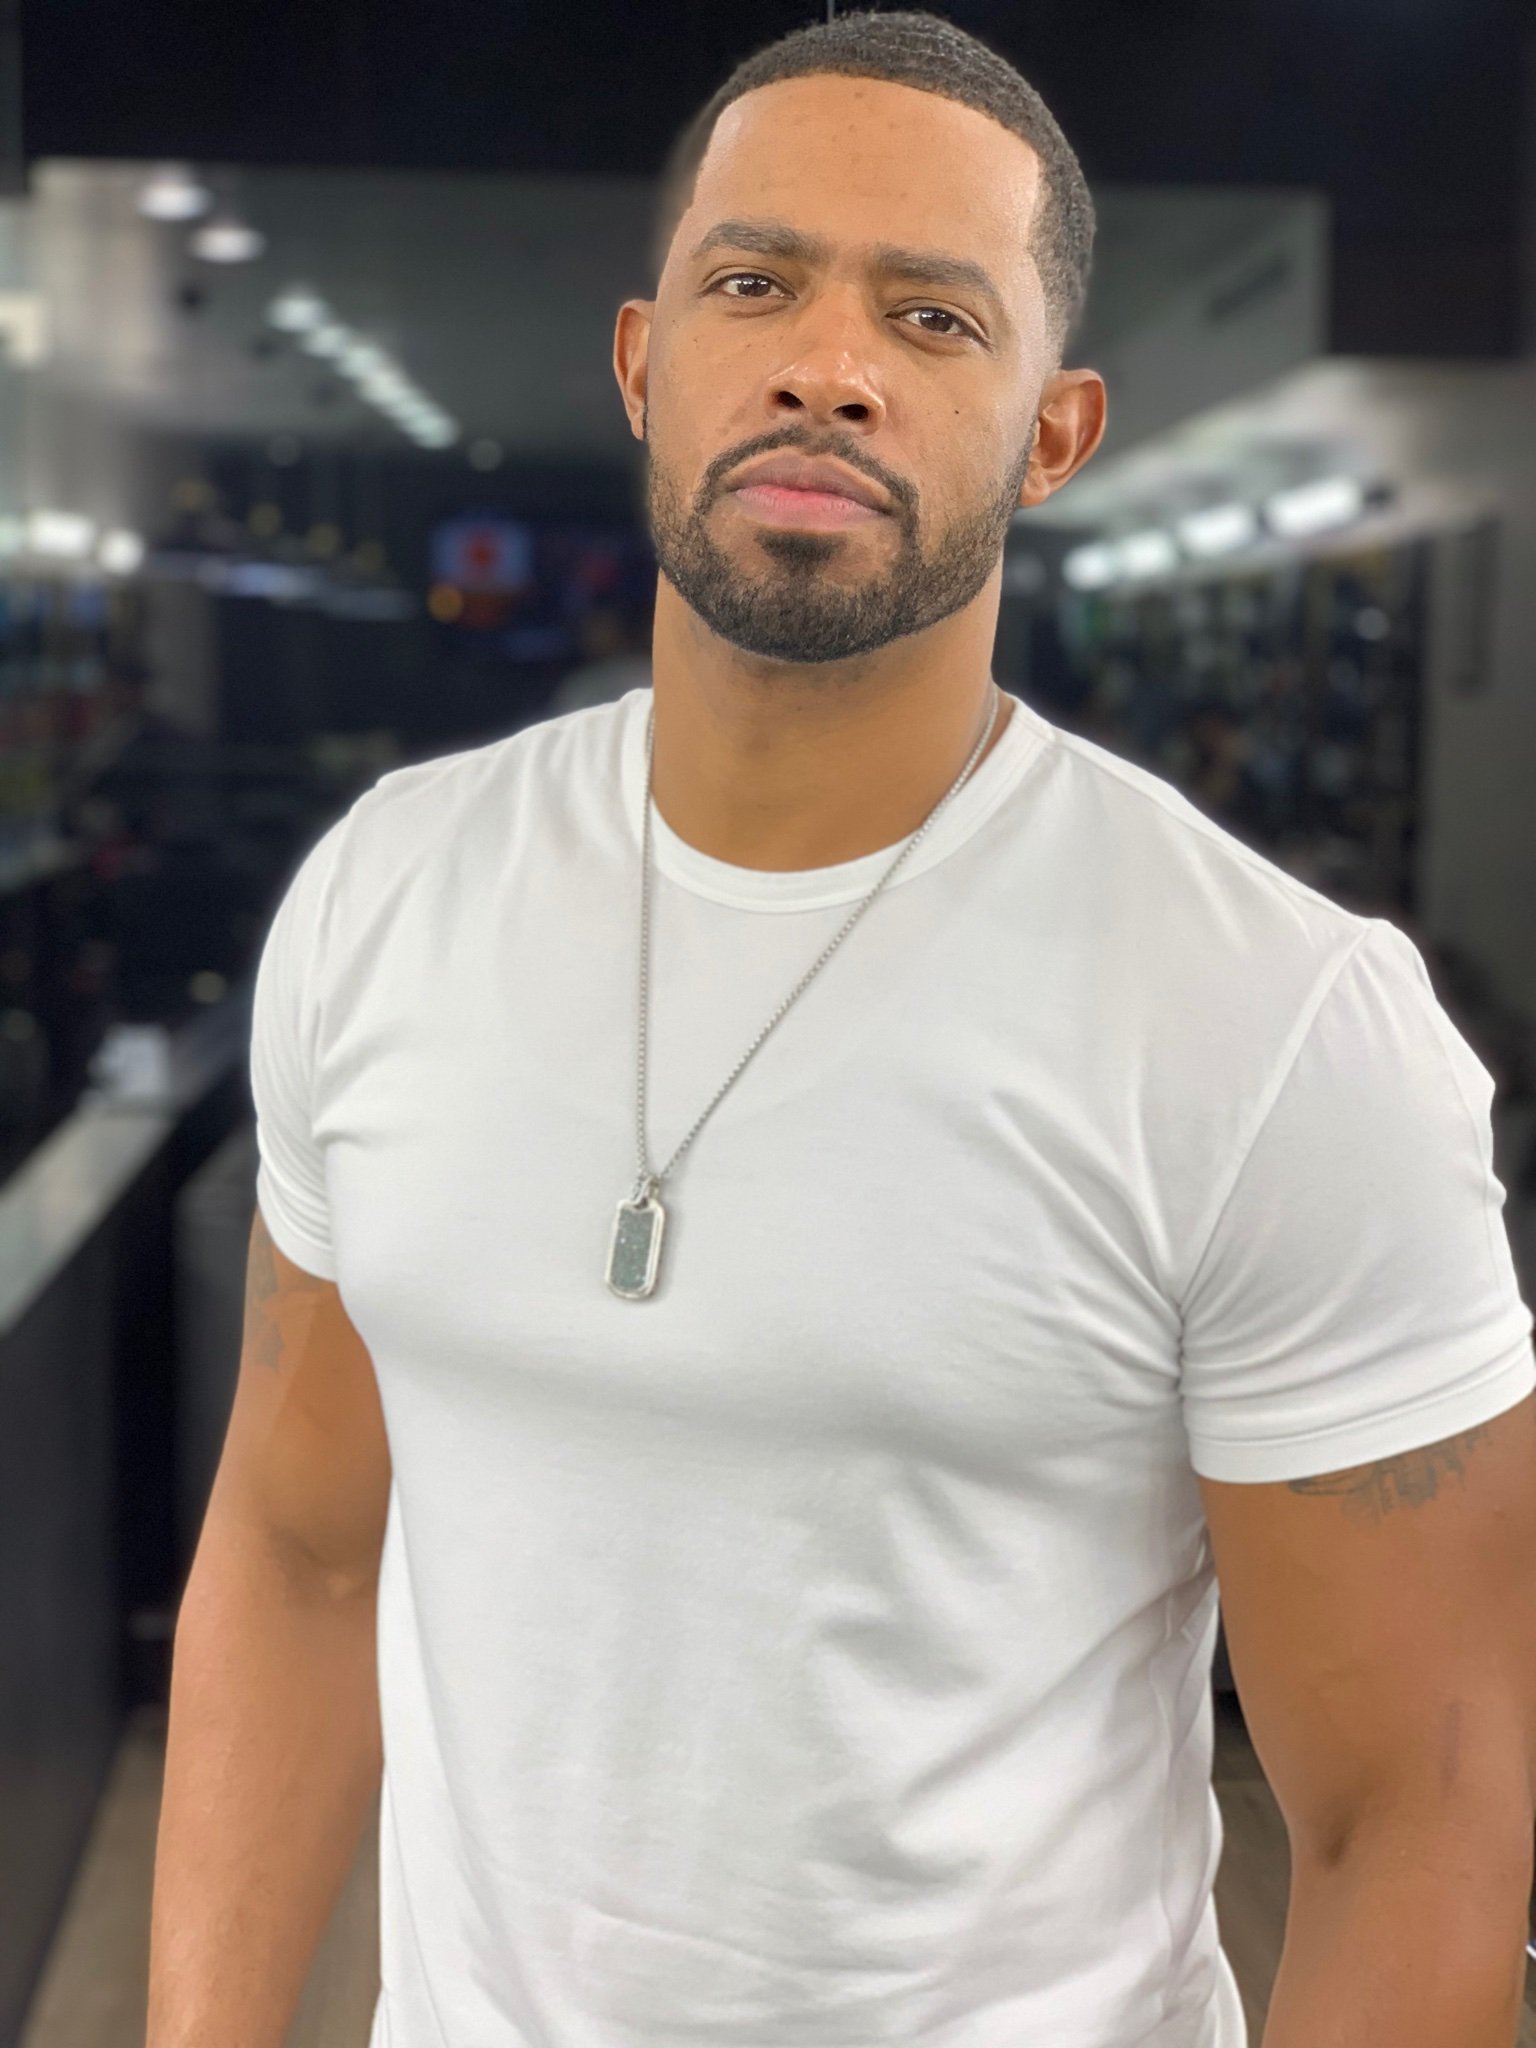 Actor/model
Chop Richardson in the movie WHY DO MEN CHEAT Love connection s.2 ep.7 TEMPTATION ISLAND 2019
For bookings email wynnsaturdays@gmail.com